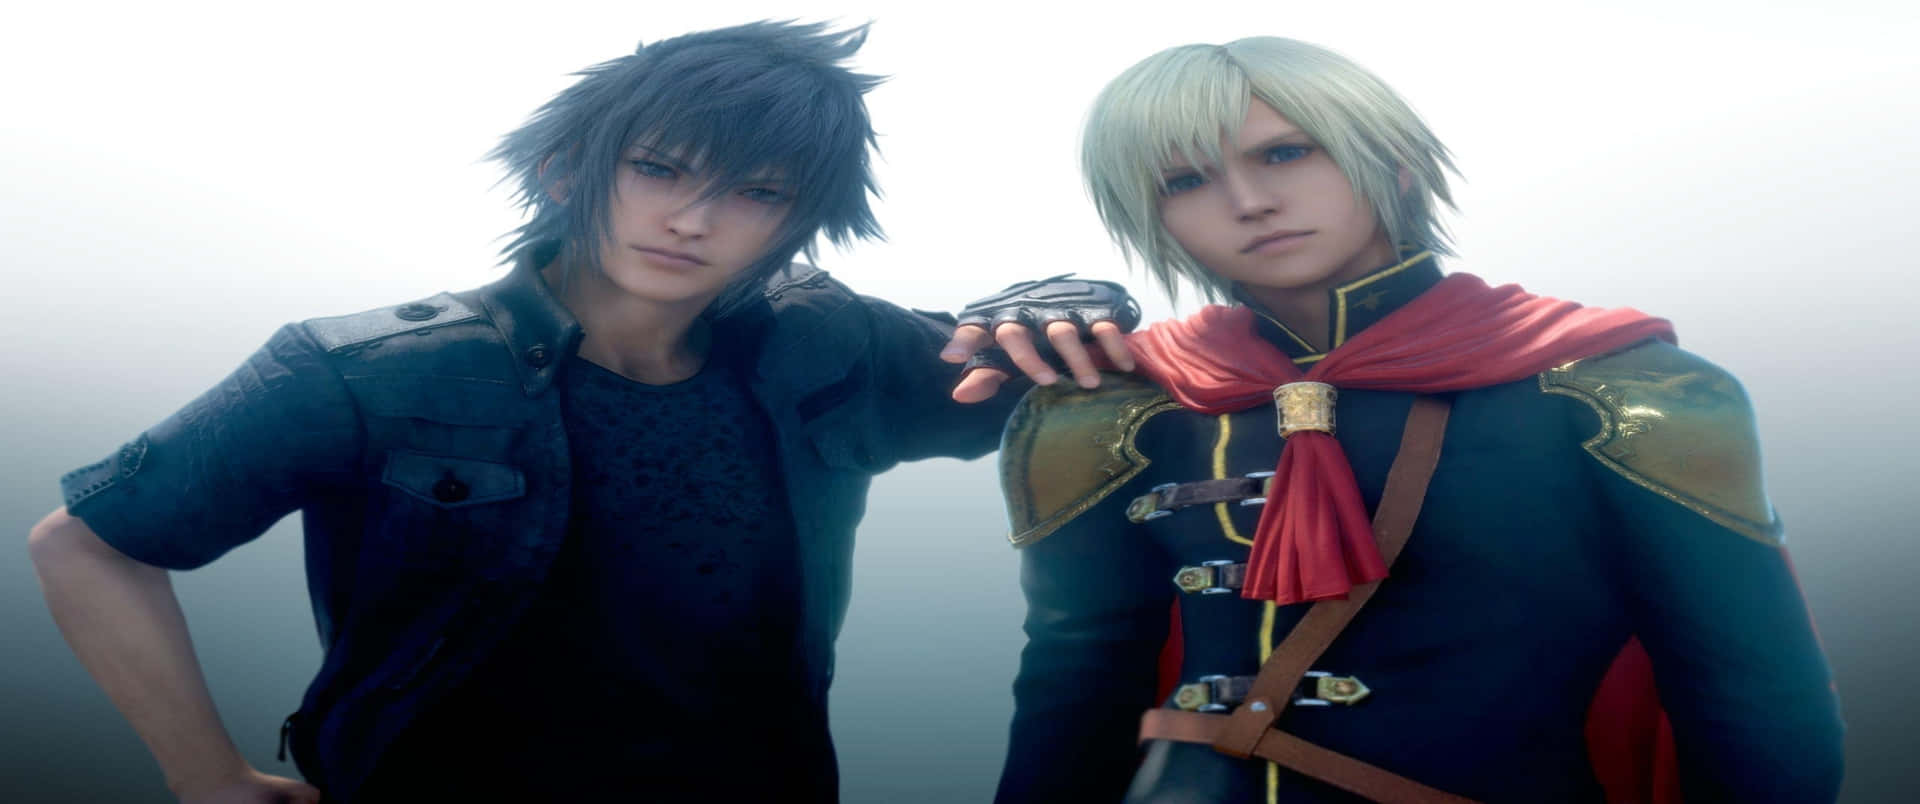 Prepare to embark on a wondrous journey in Final Fantasy XV